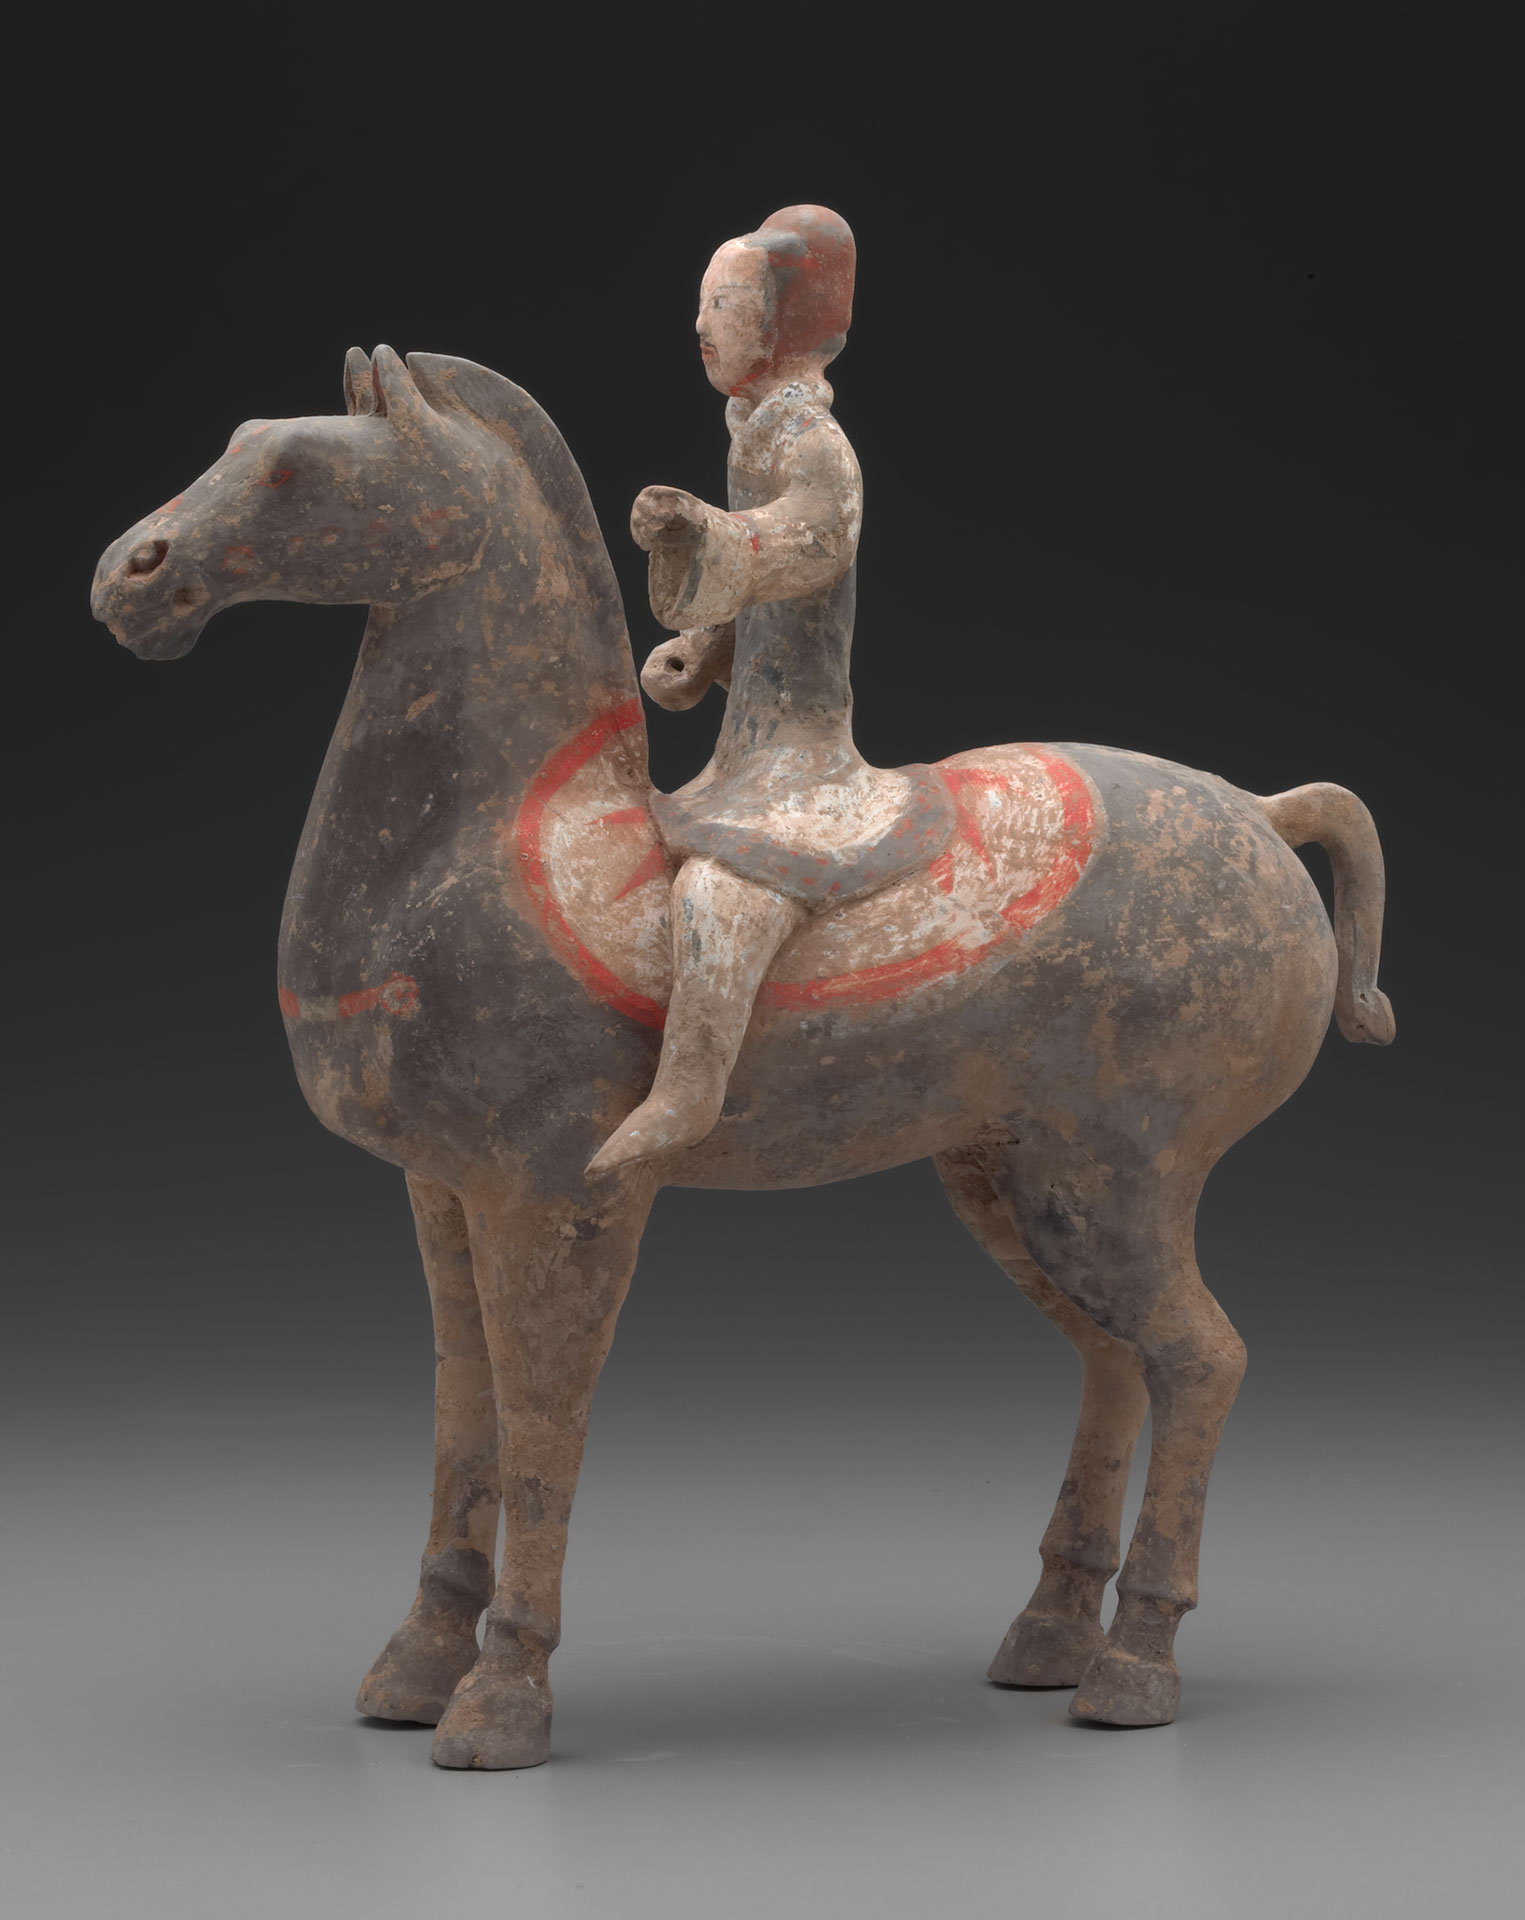 Funerary statuette of an equestrian, earthenware with pigments, Western Han dynasty, China, second to first century BCE